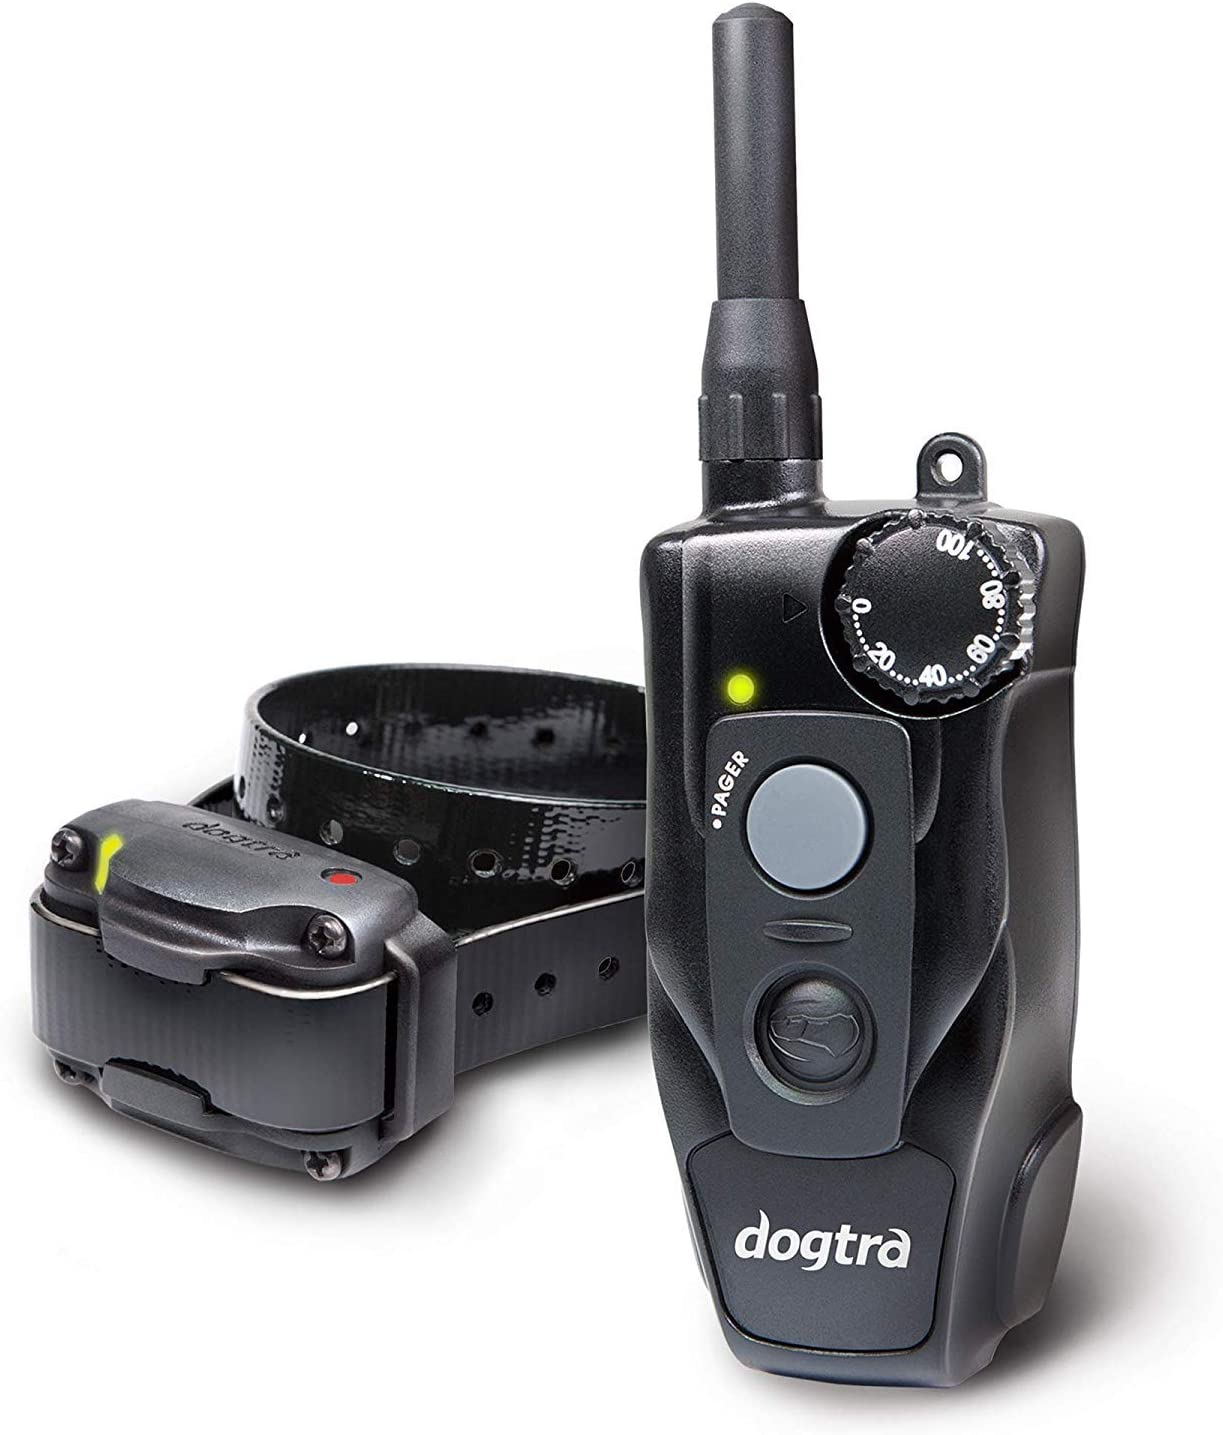 Dogtra 200C Remote Training Collar - 1/2 Mile Range, Rechargeable, Waterproof - Plus 1 iClick Training Card, Jestik Click Trainer - Value Bundle